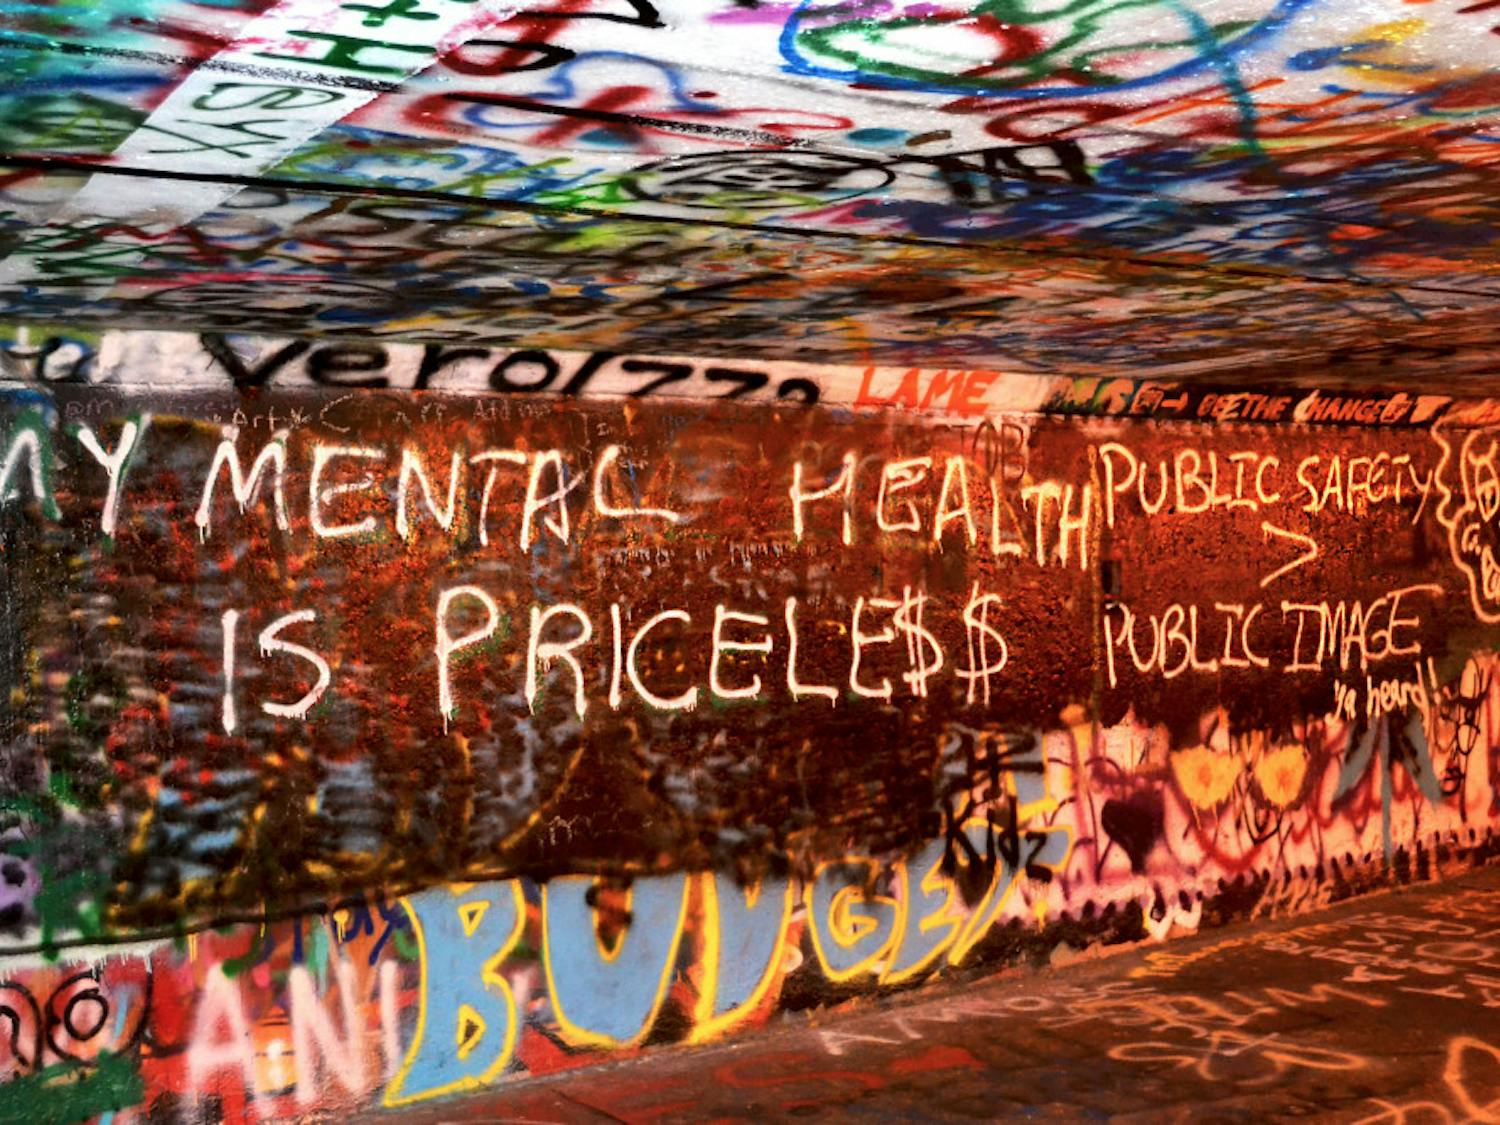 Graffiti art touching on the topic of mental health adorns the walls of Norman Tunnel in November 2017.